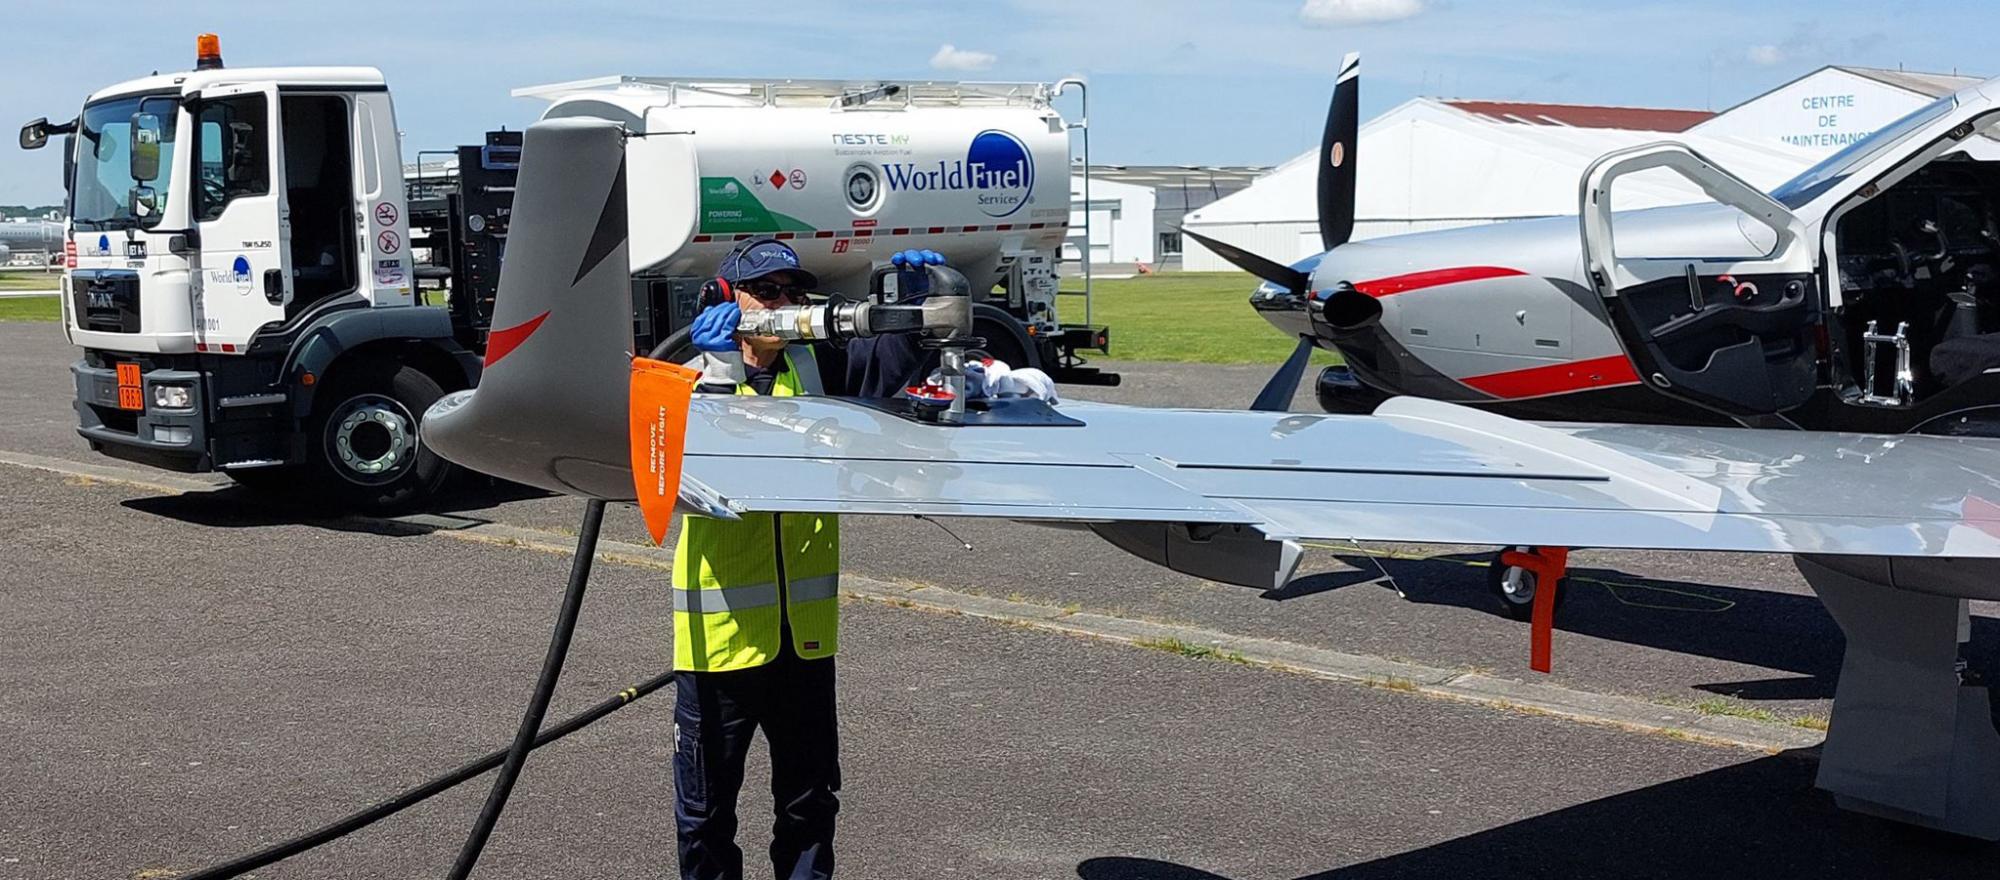 SAF Fueling of a TBM turboprop Daher's Tarbes, France headquarters